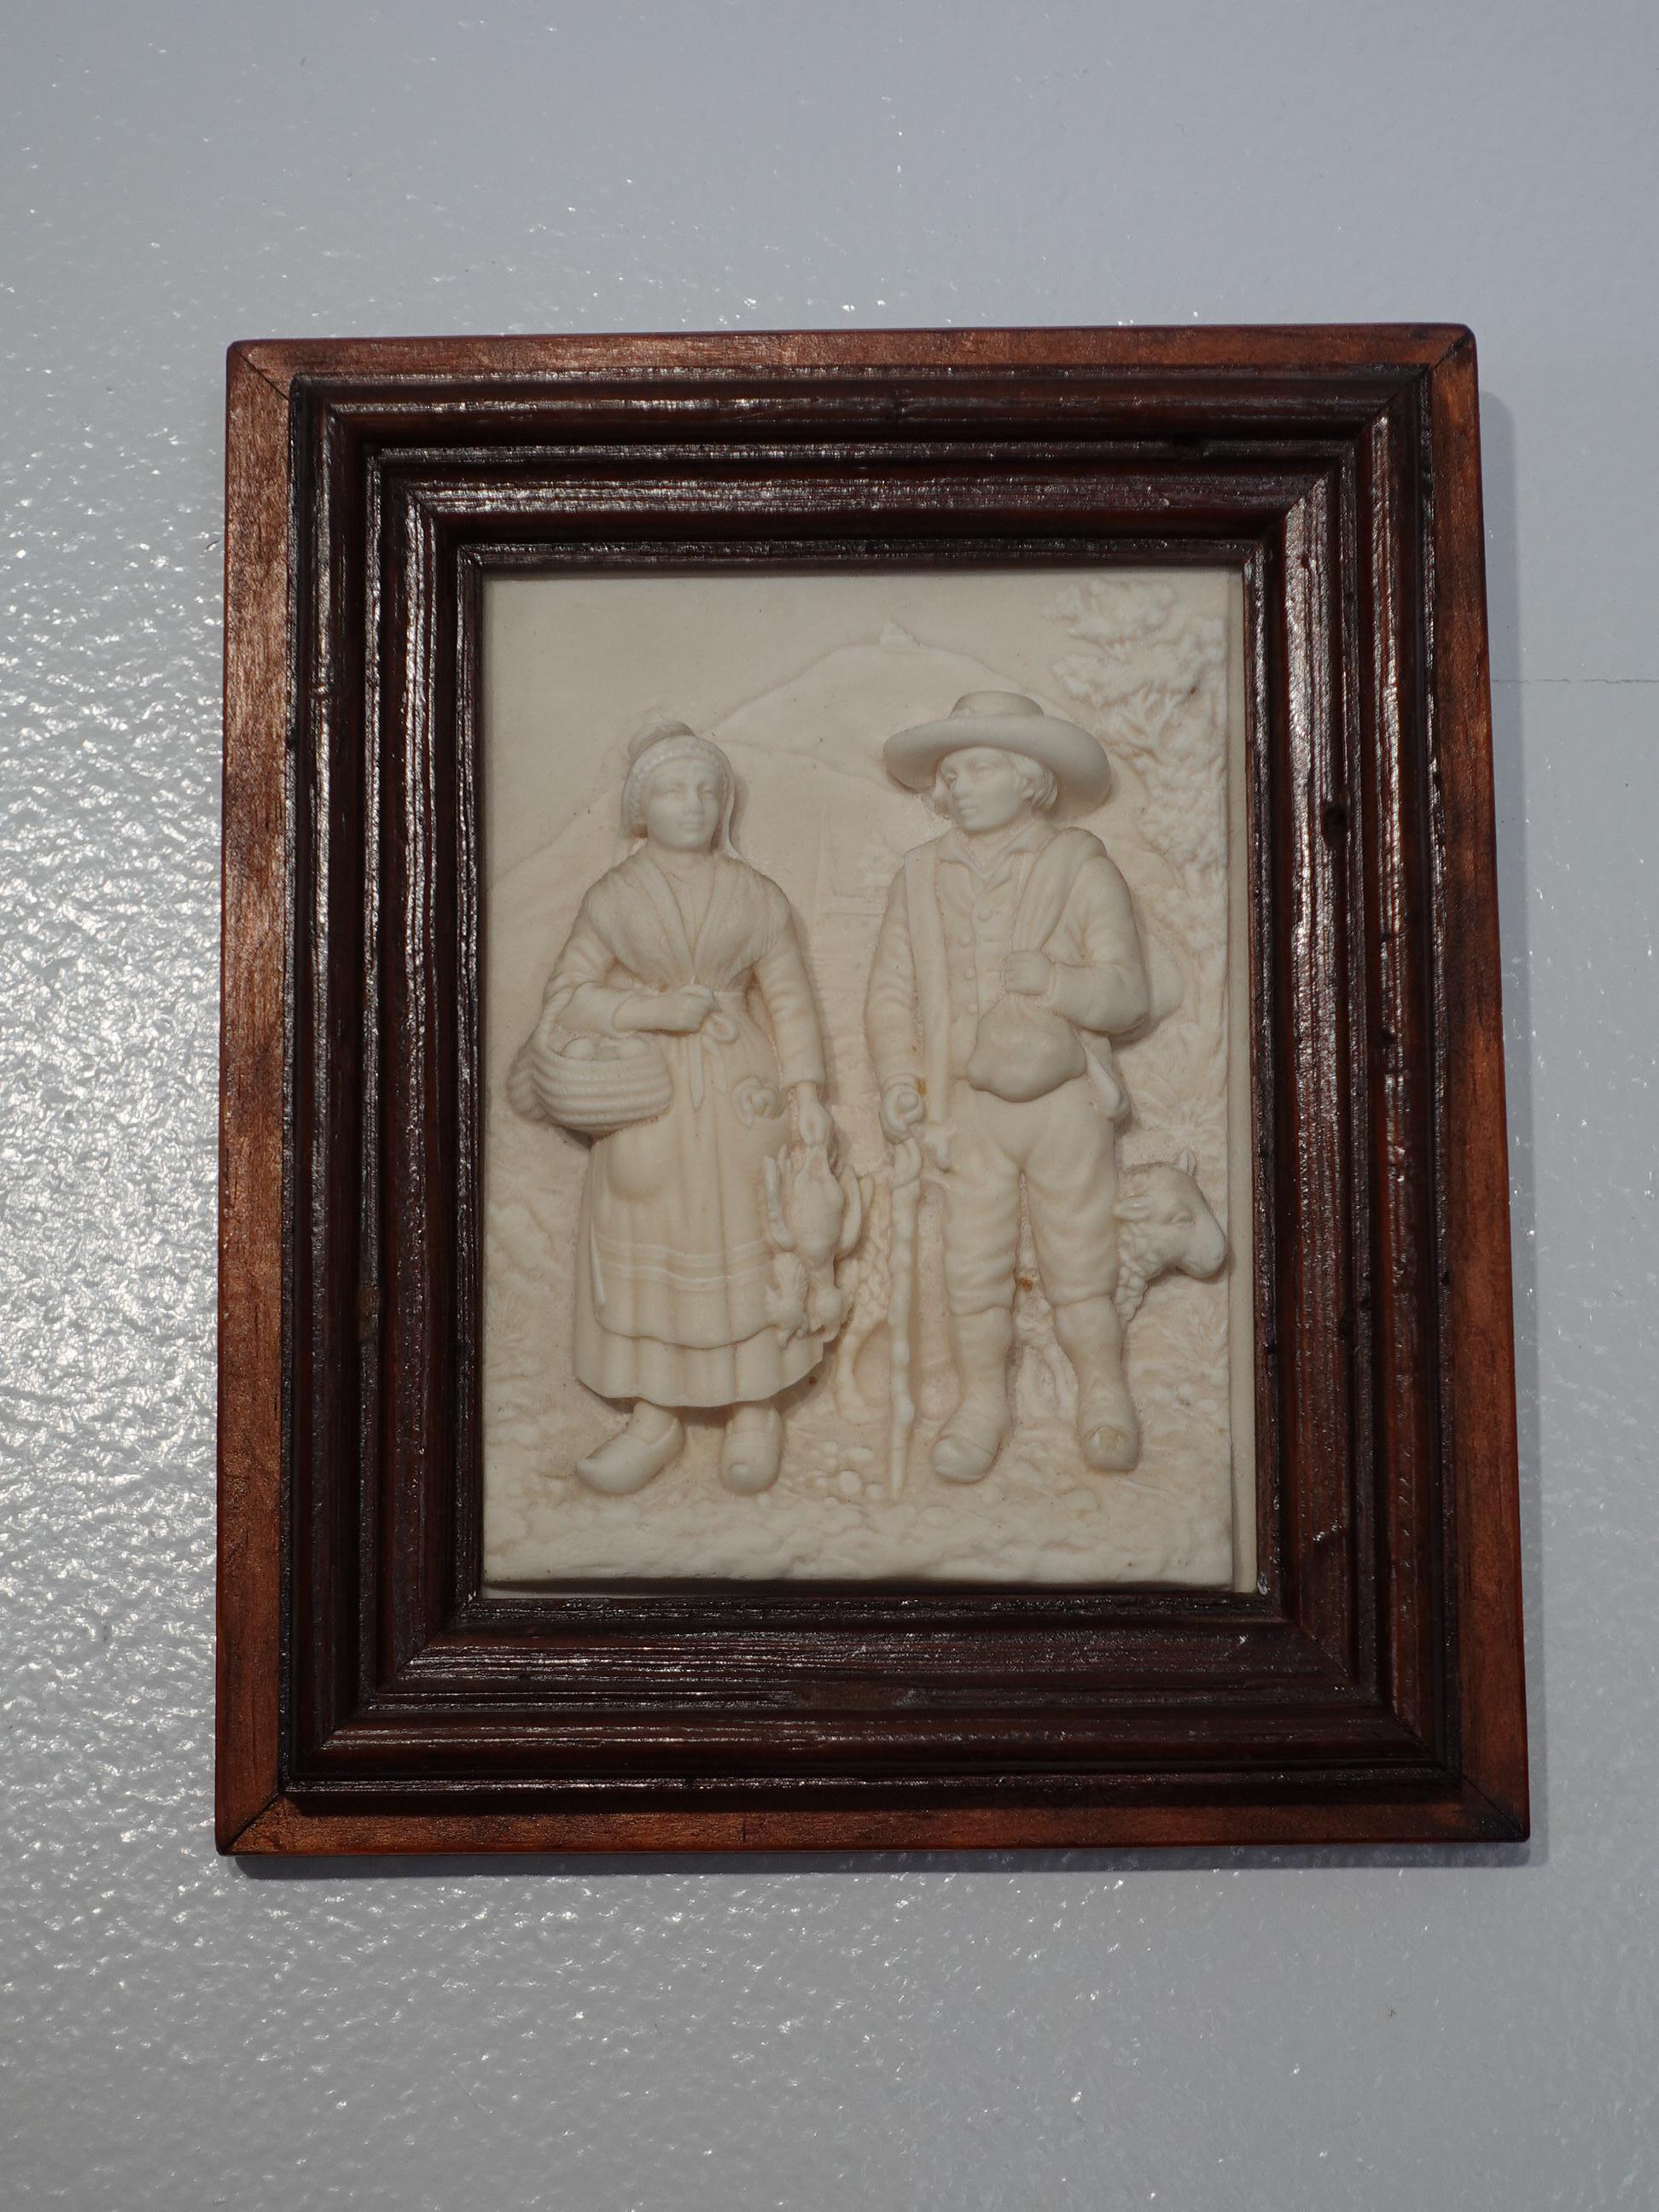 France
20th Century
Bas relief depicts a young woman carrying fowl and a young man with a sheep. The relief was created by dissolved limestone in water running from stalactites into a copper mold.

Dimensions
Limestone 5 1/8